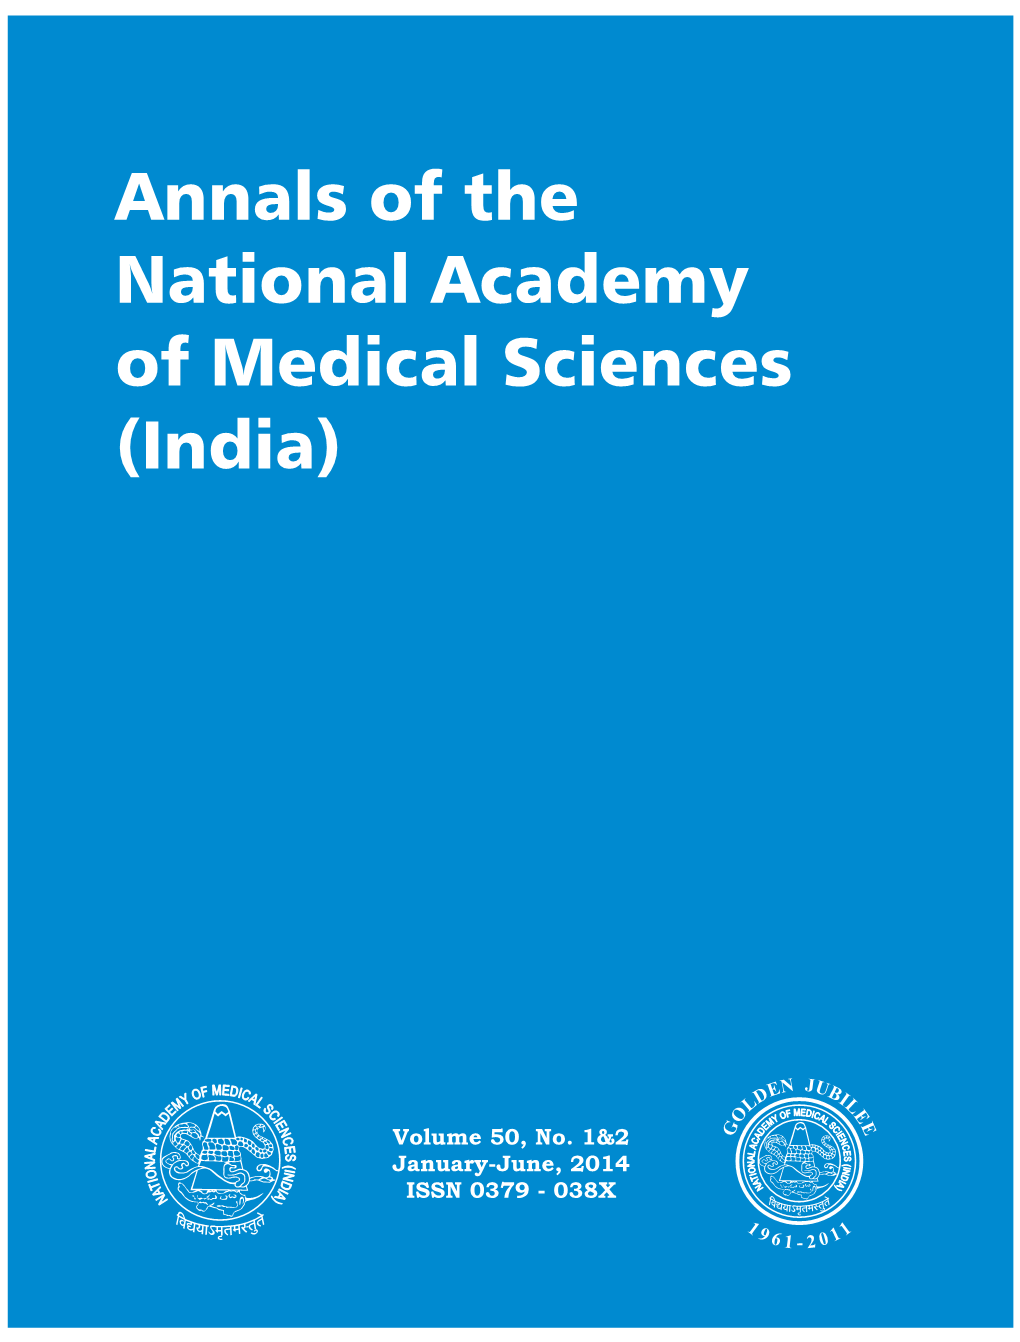 Annals of the National Academy of Medical Sciences (India)